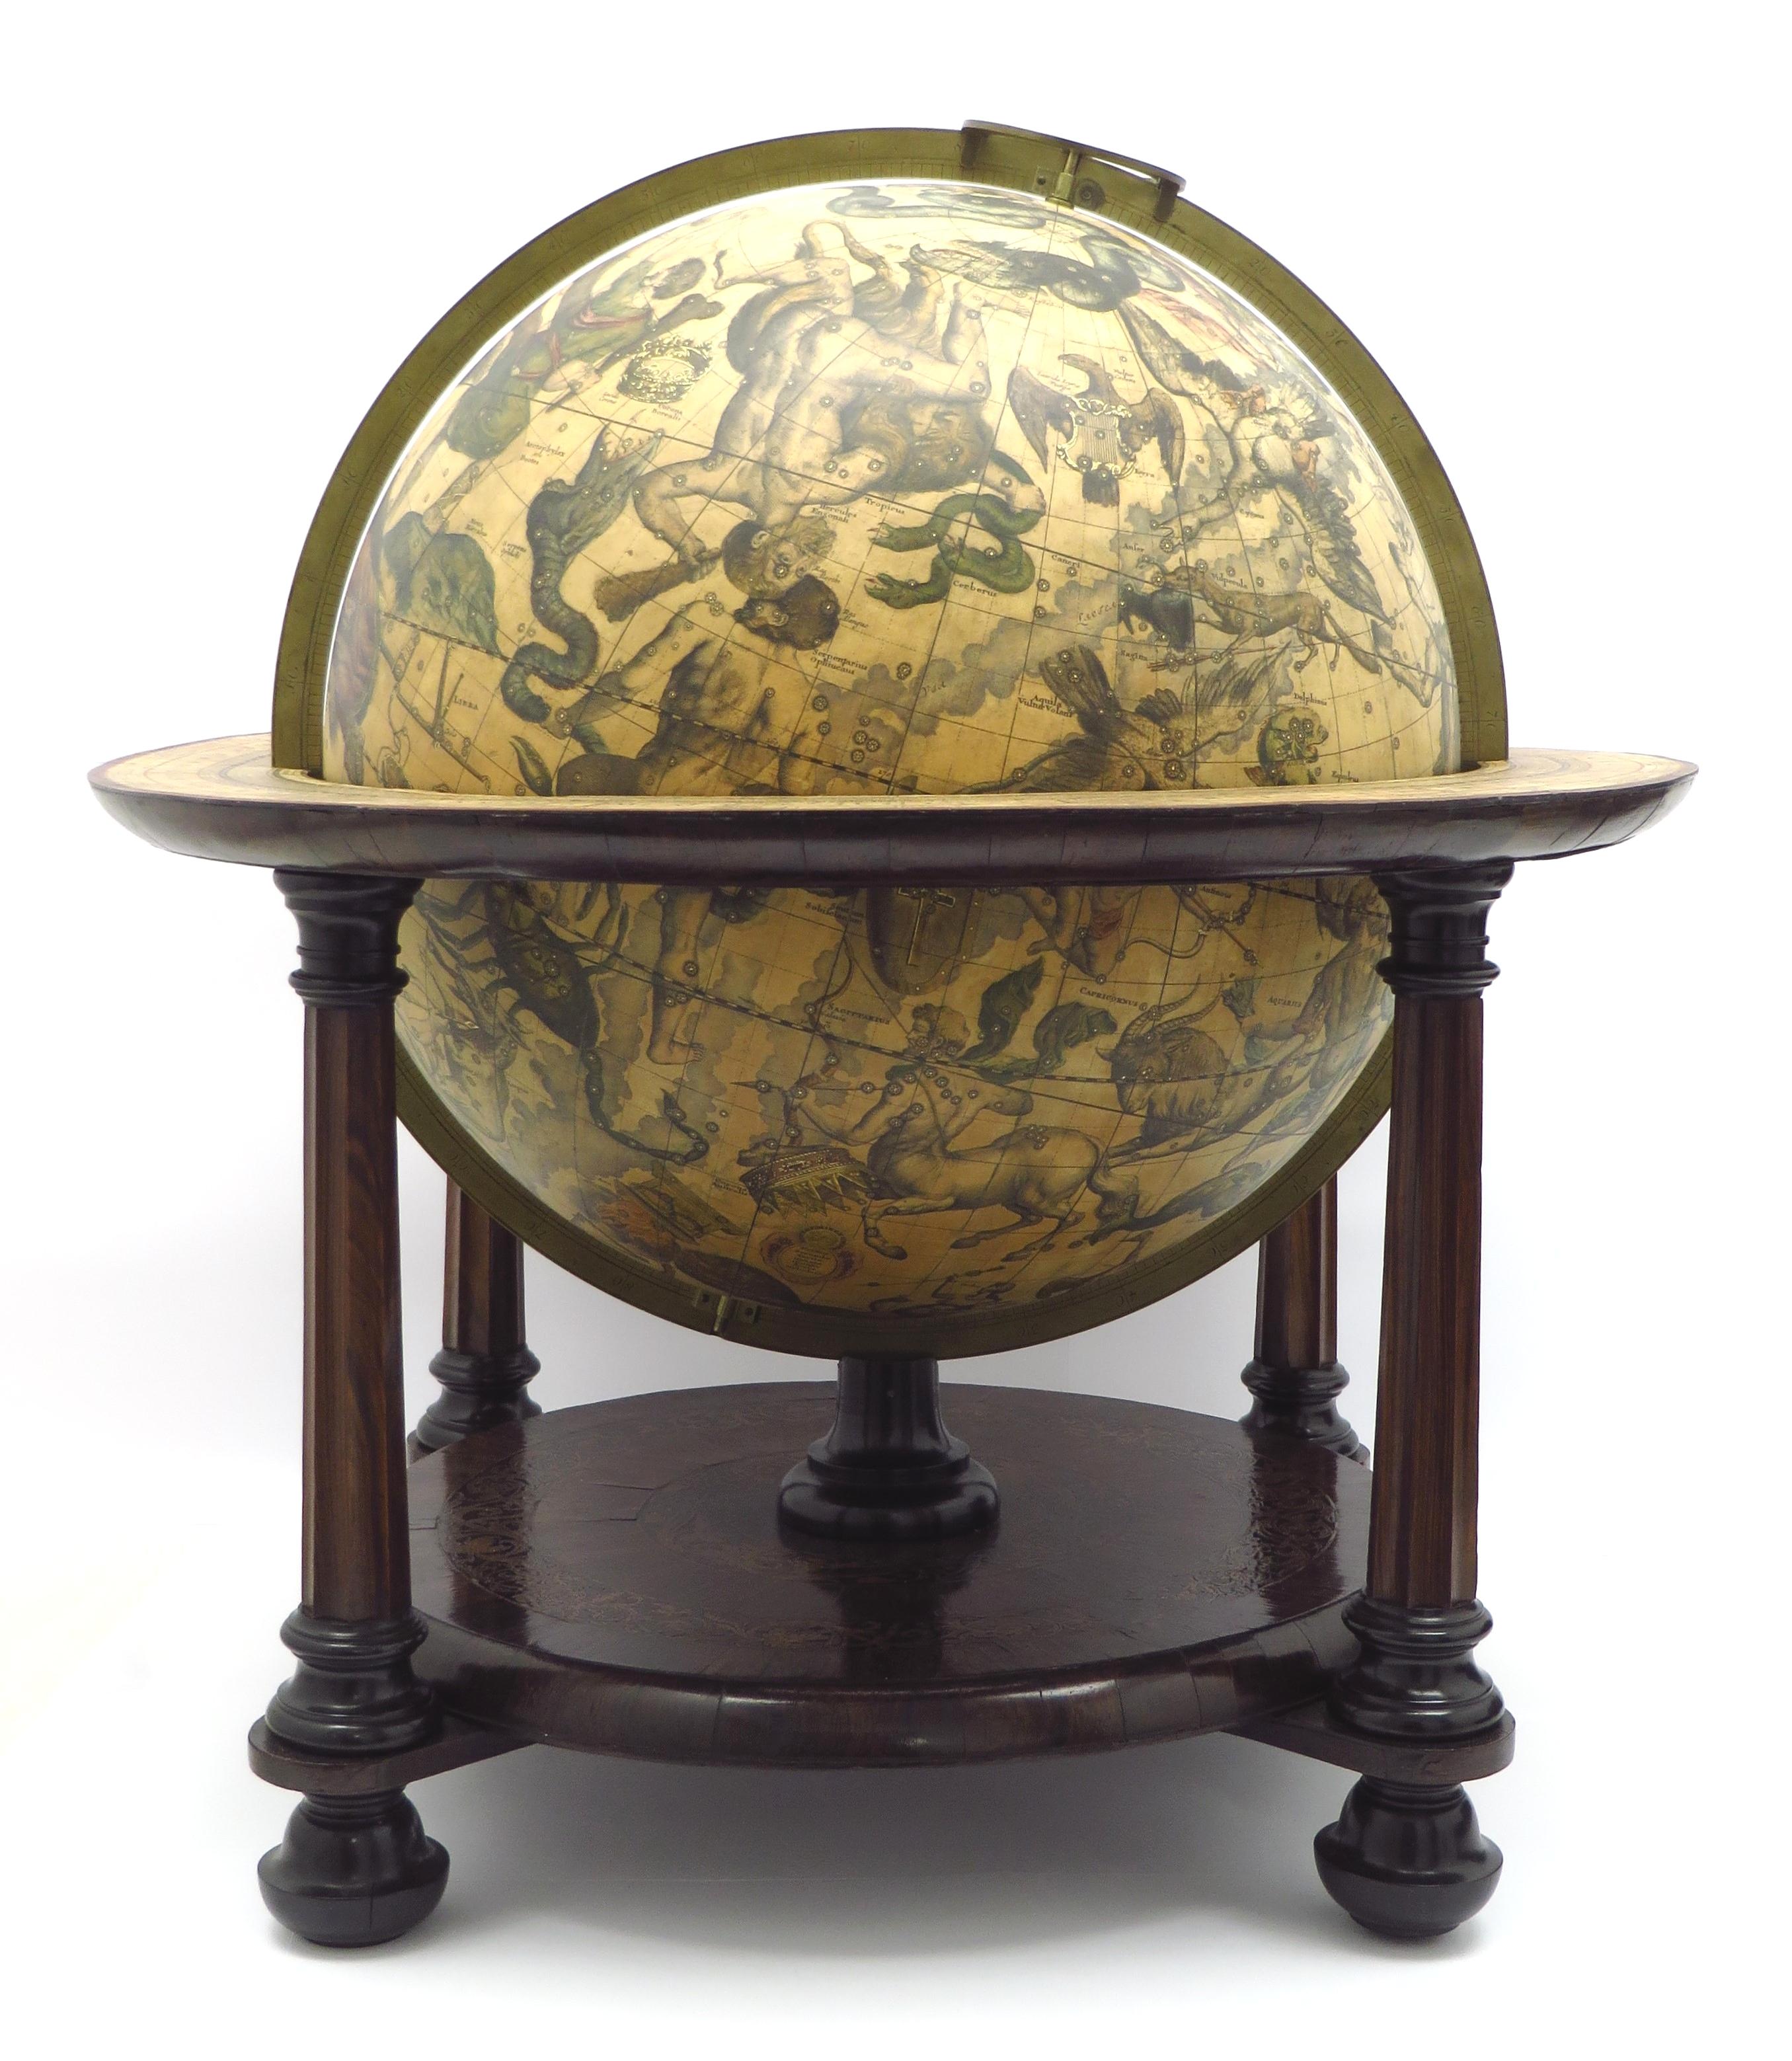 A magnificent and very rare early 18th century celestial table globe produced by Gerard and Leonard Valk. Established at the end of the previous century by Gerard Valk, and assisted by his son Leonard, the firm became the only publisher of globes in